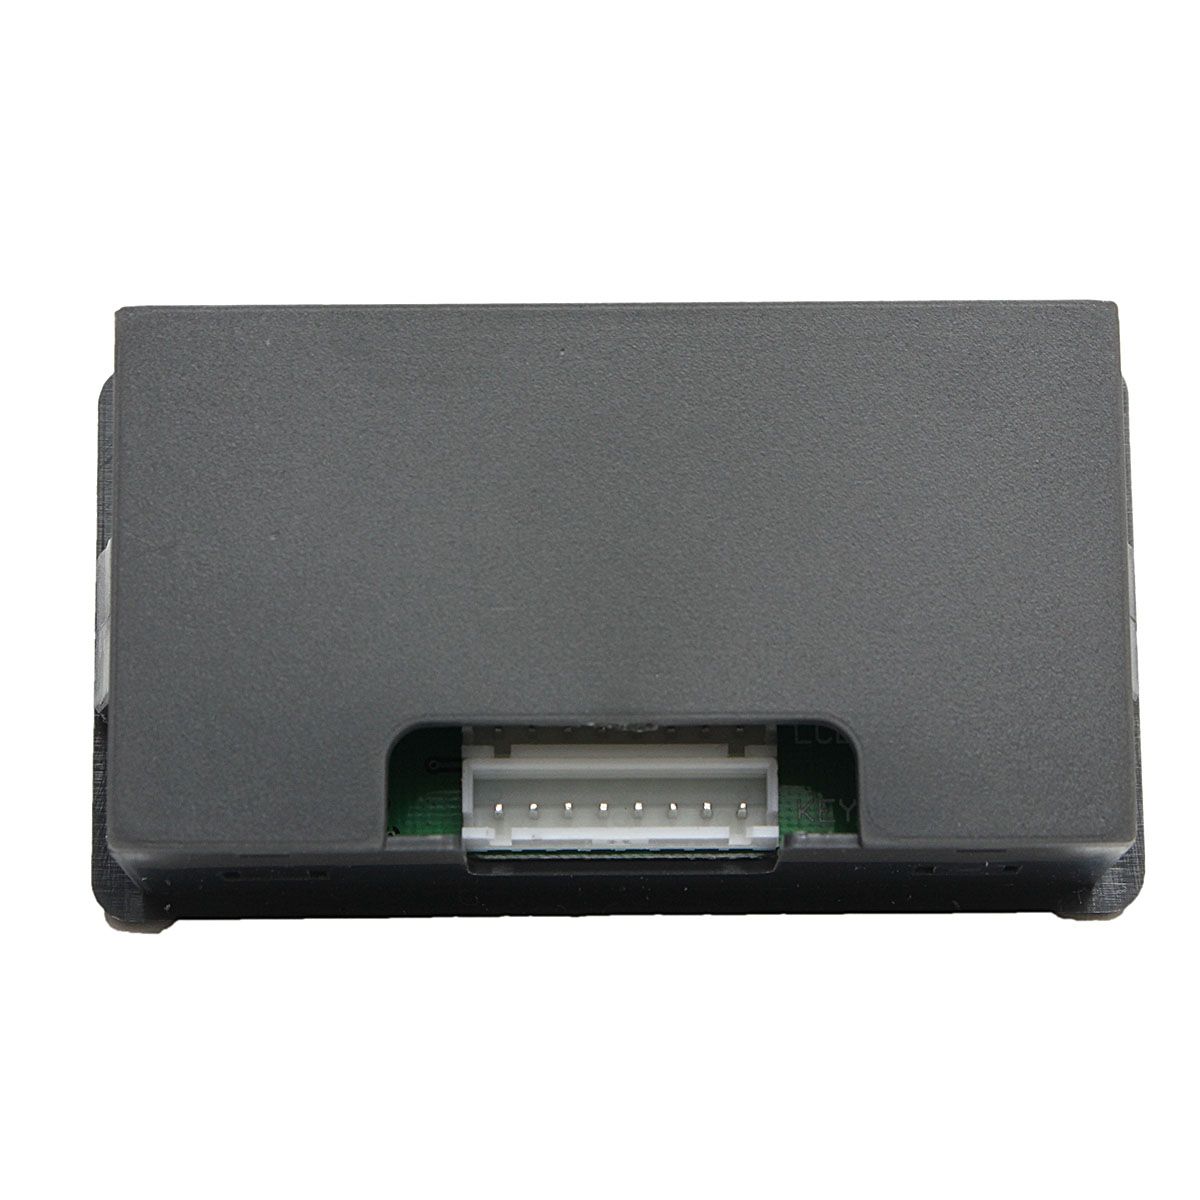 RIDENreg-DPS3012-Programmable-Constant-Voltage-Current-Step-Down-Power-Supply-Module-1261787